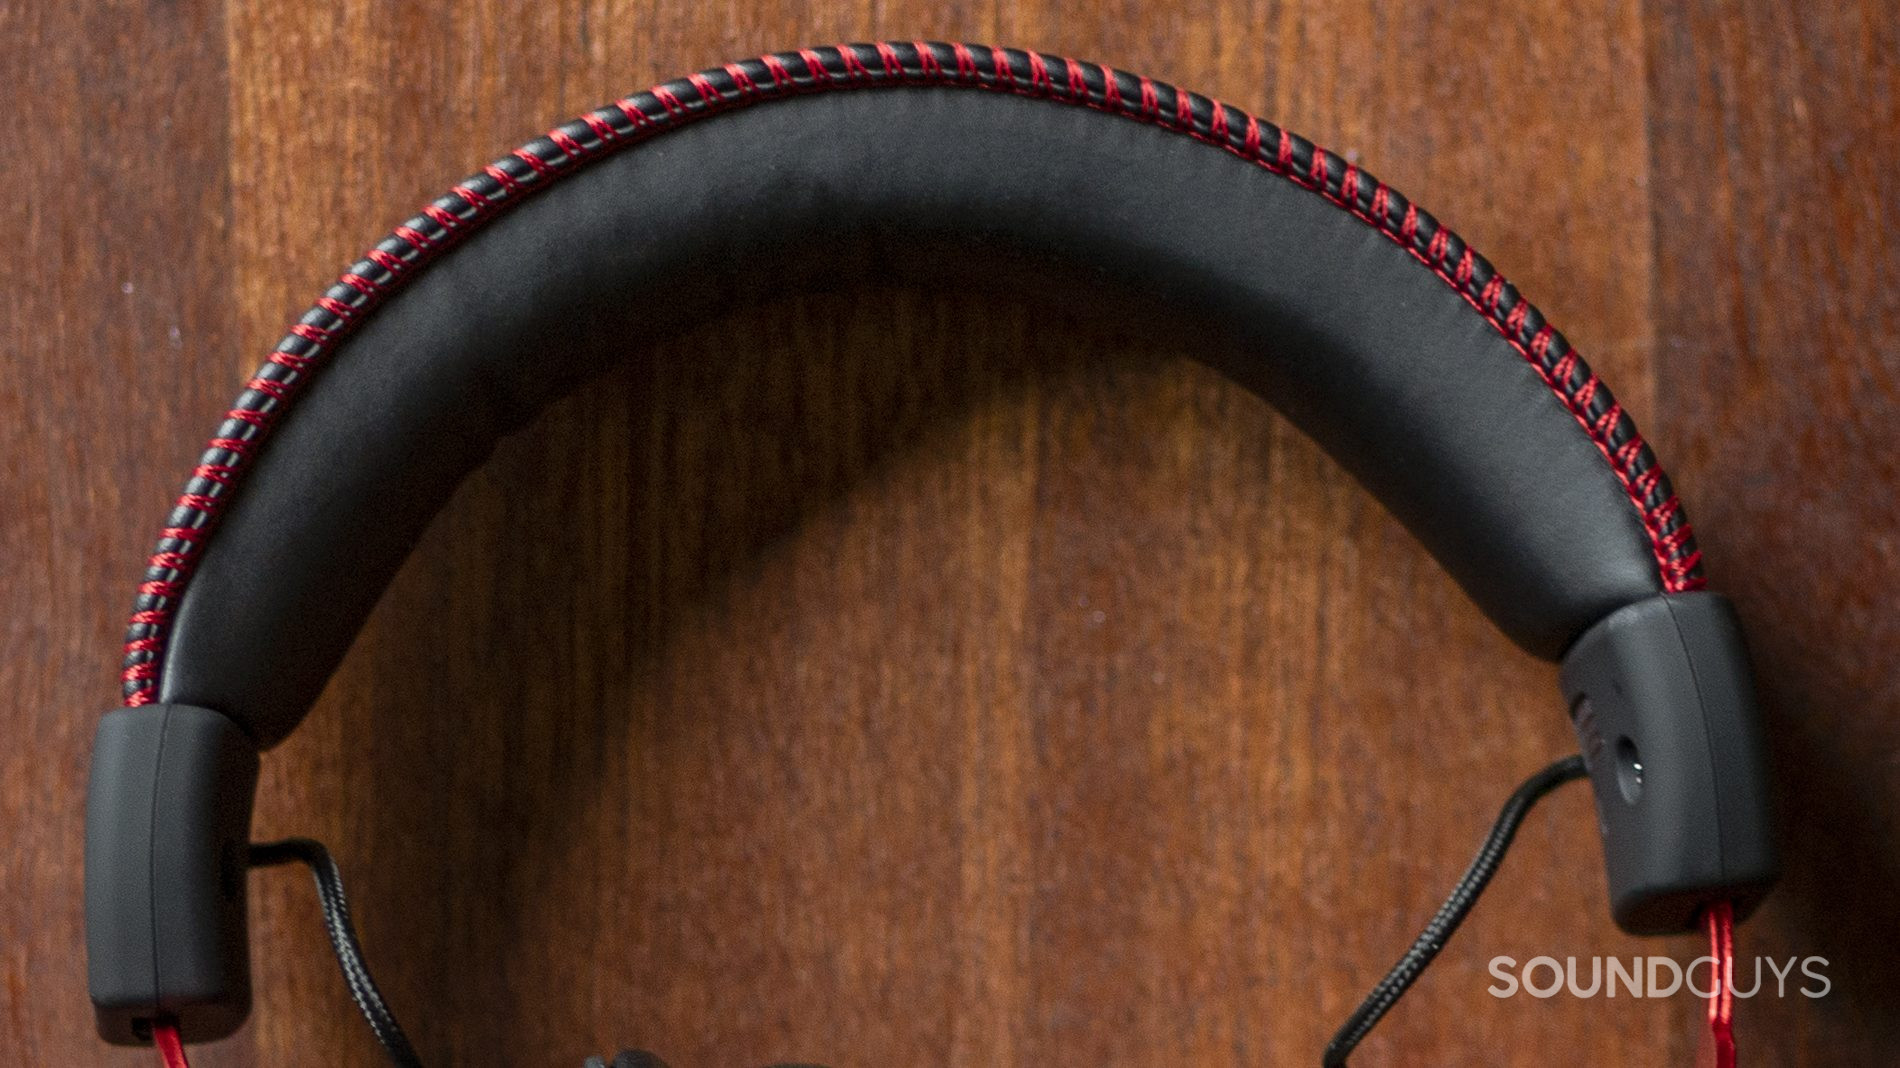 The HyperX Cloud Alpha's thick band padding.